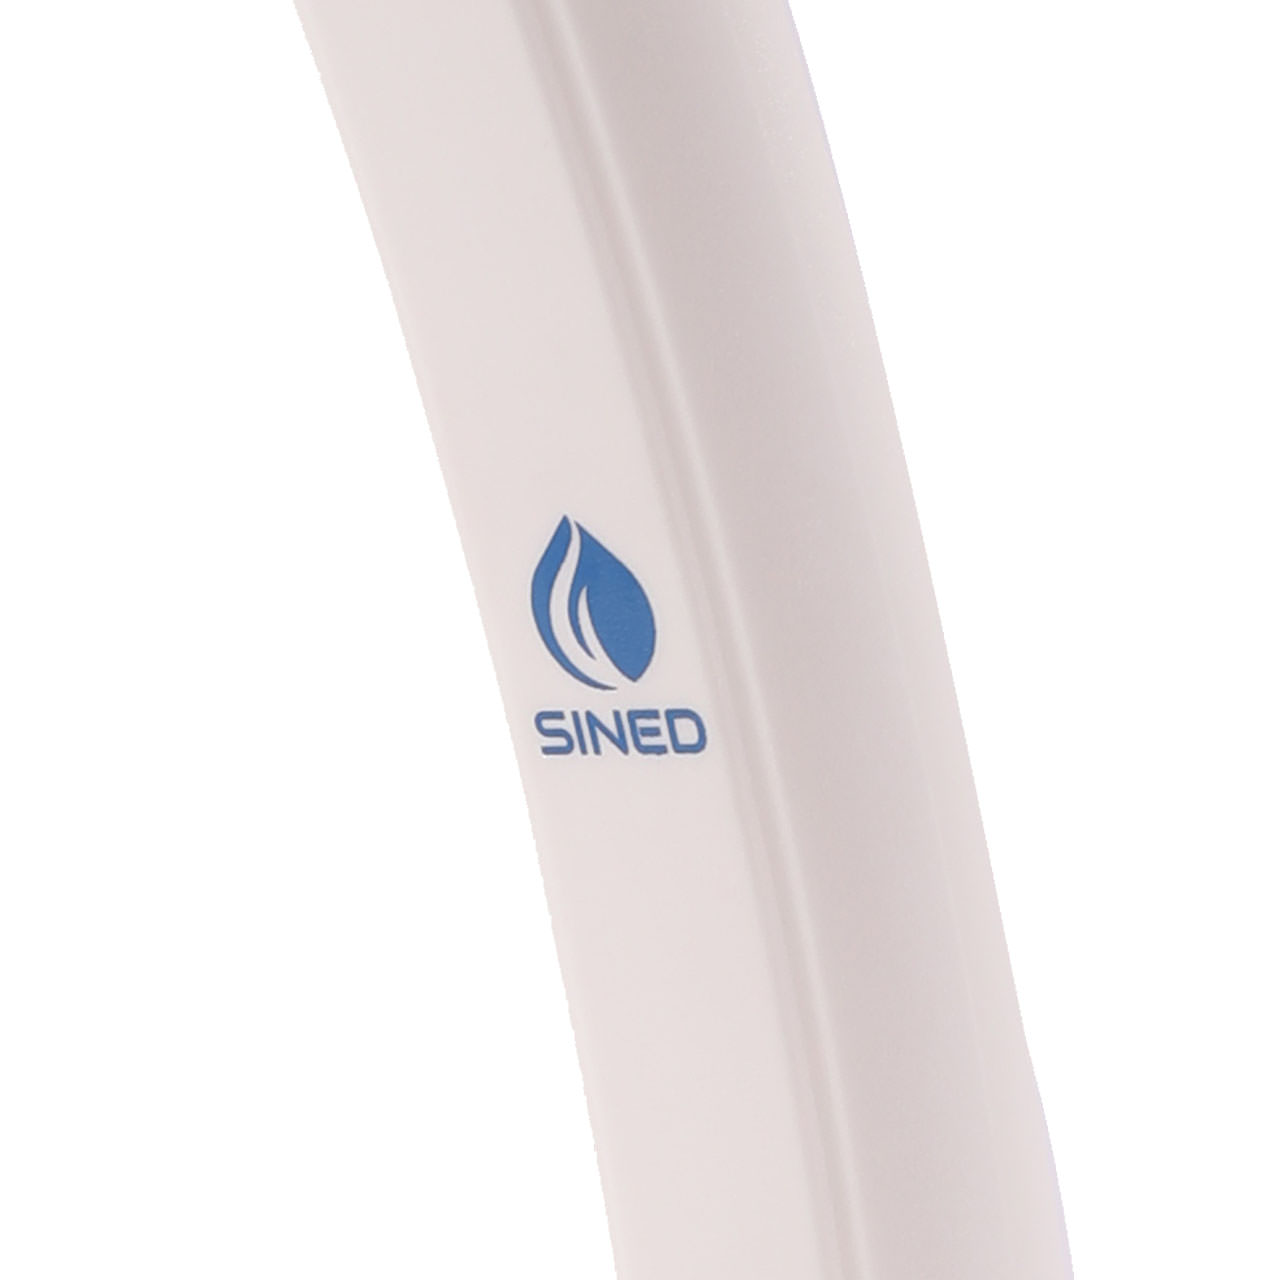 SINED  White phosphorescent shower for garden is a product on offer at the best price